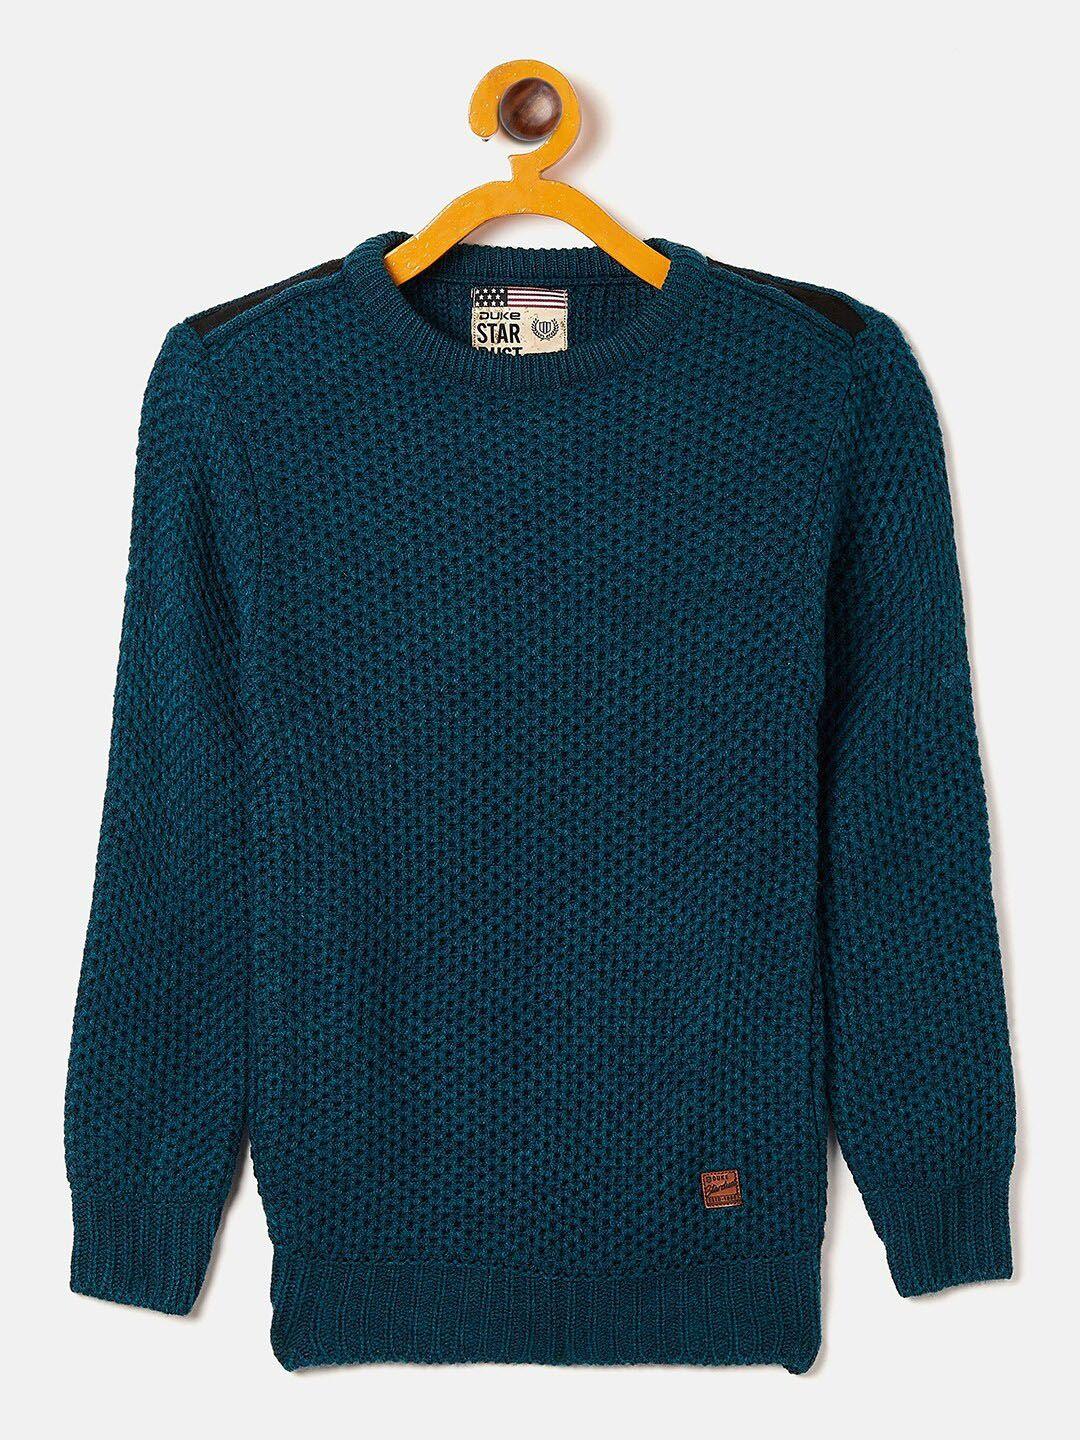 duke-boys-blue-cable-knit-woolen-pullover